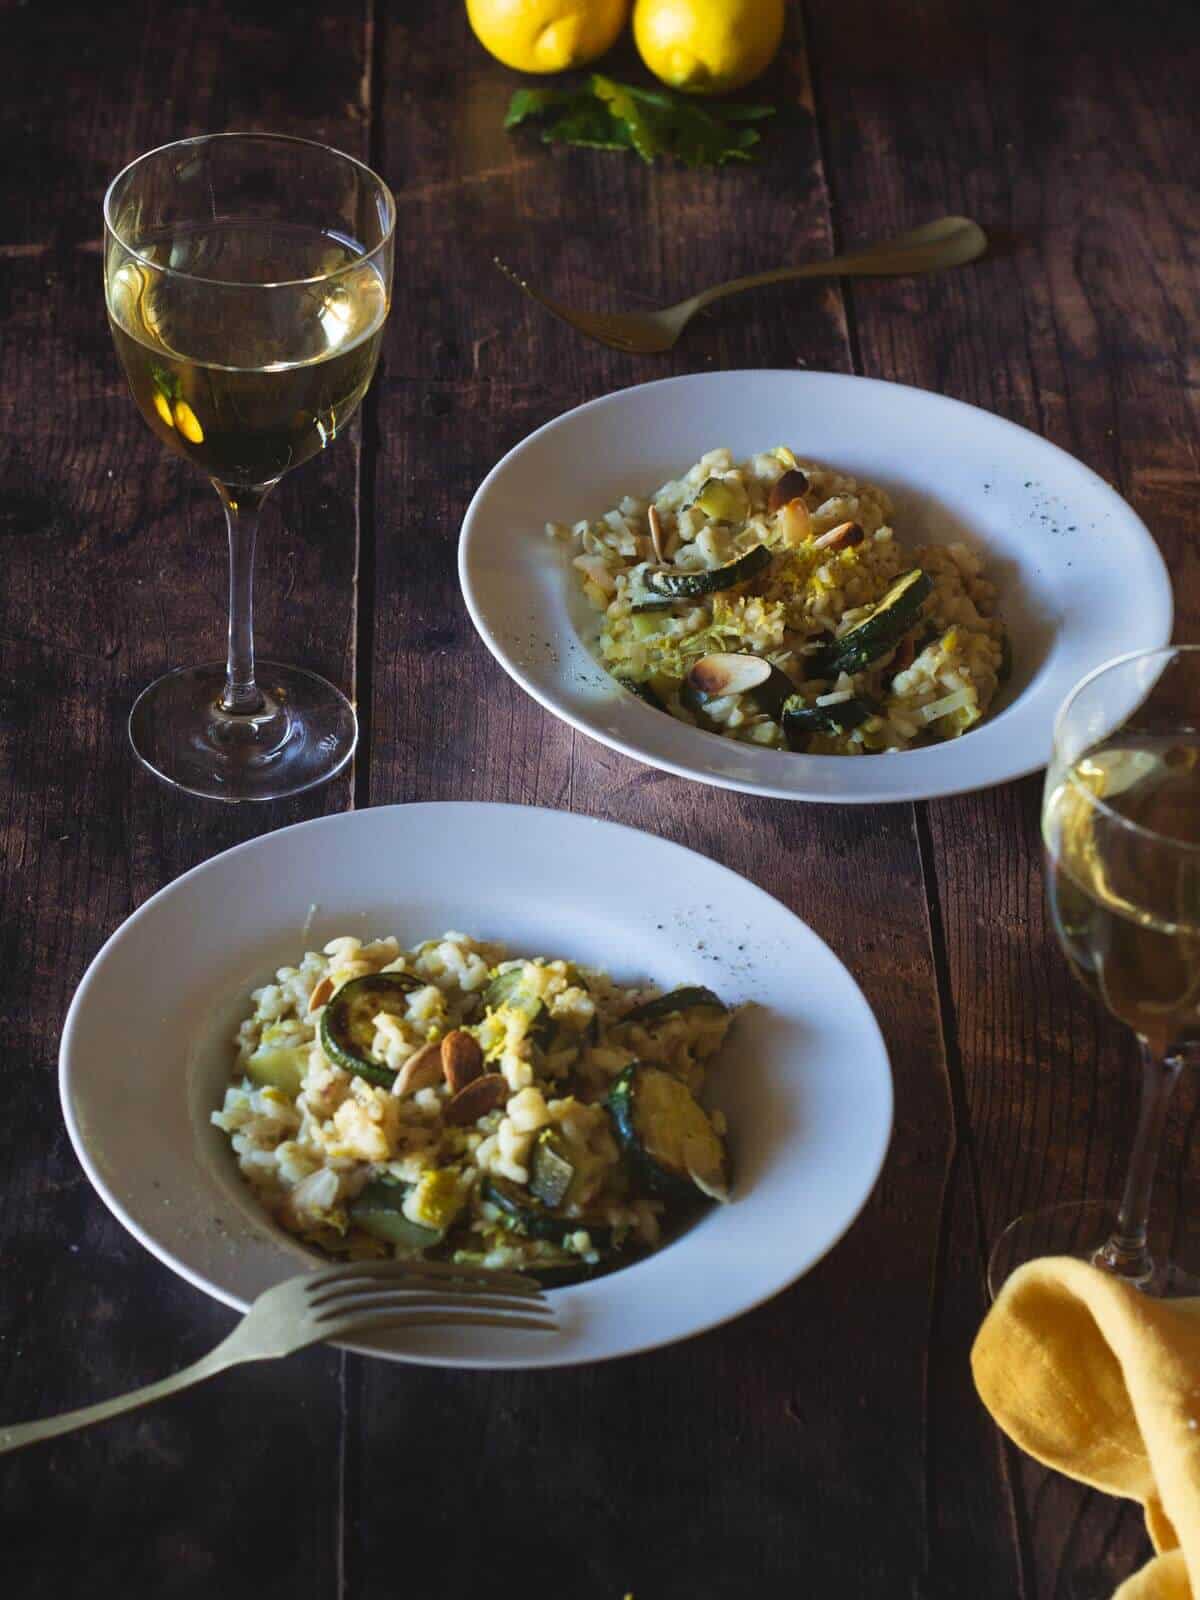 two plated winter risotto in a wooden table with 2 glasses of white wine